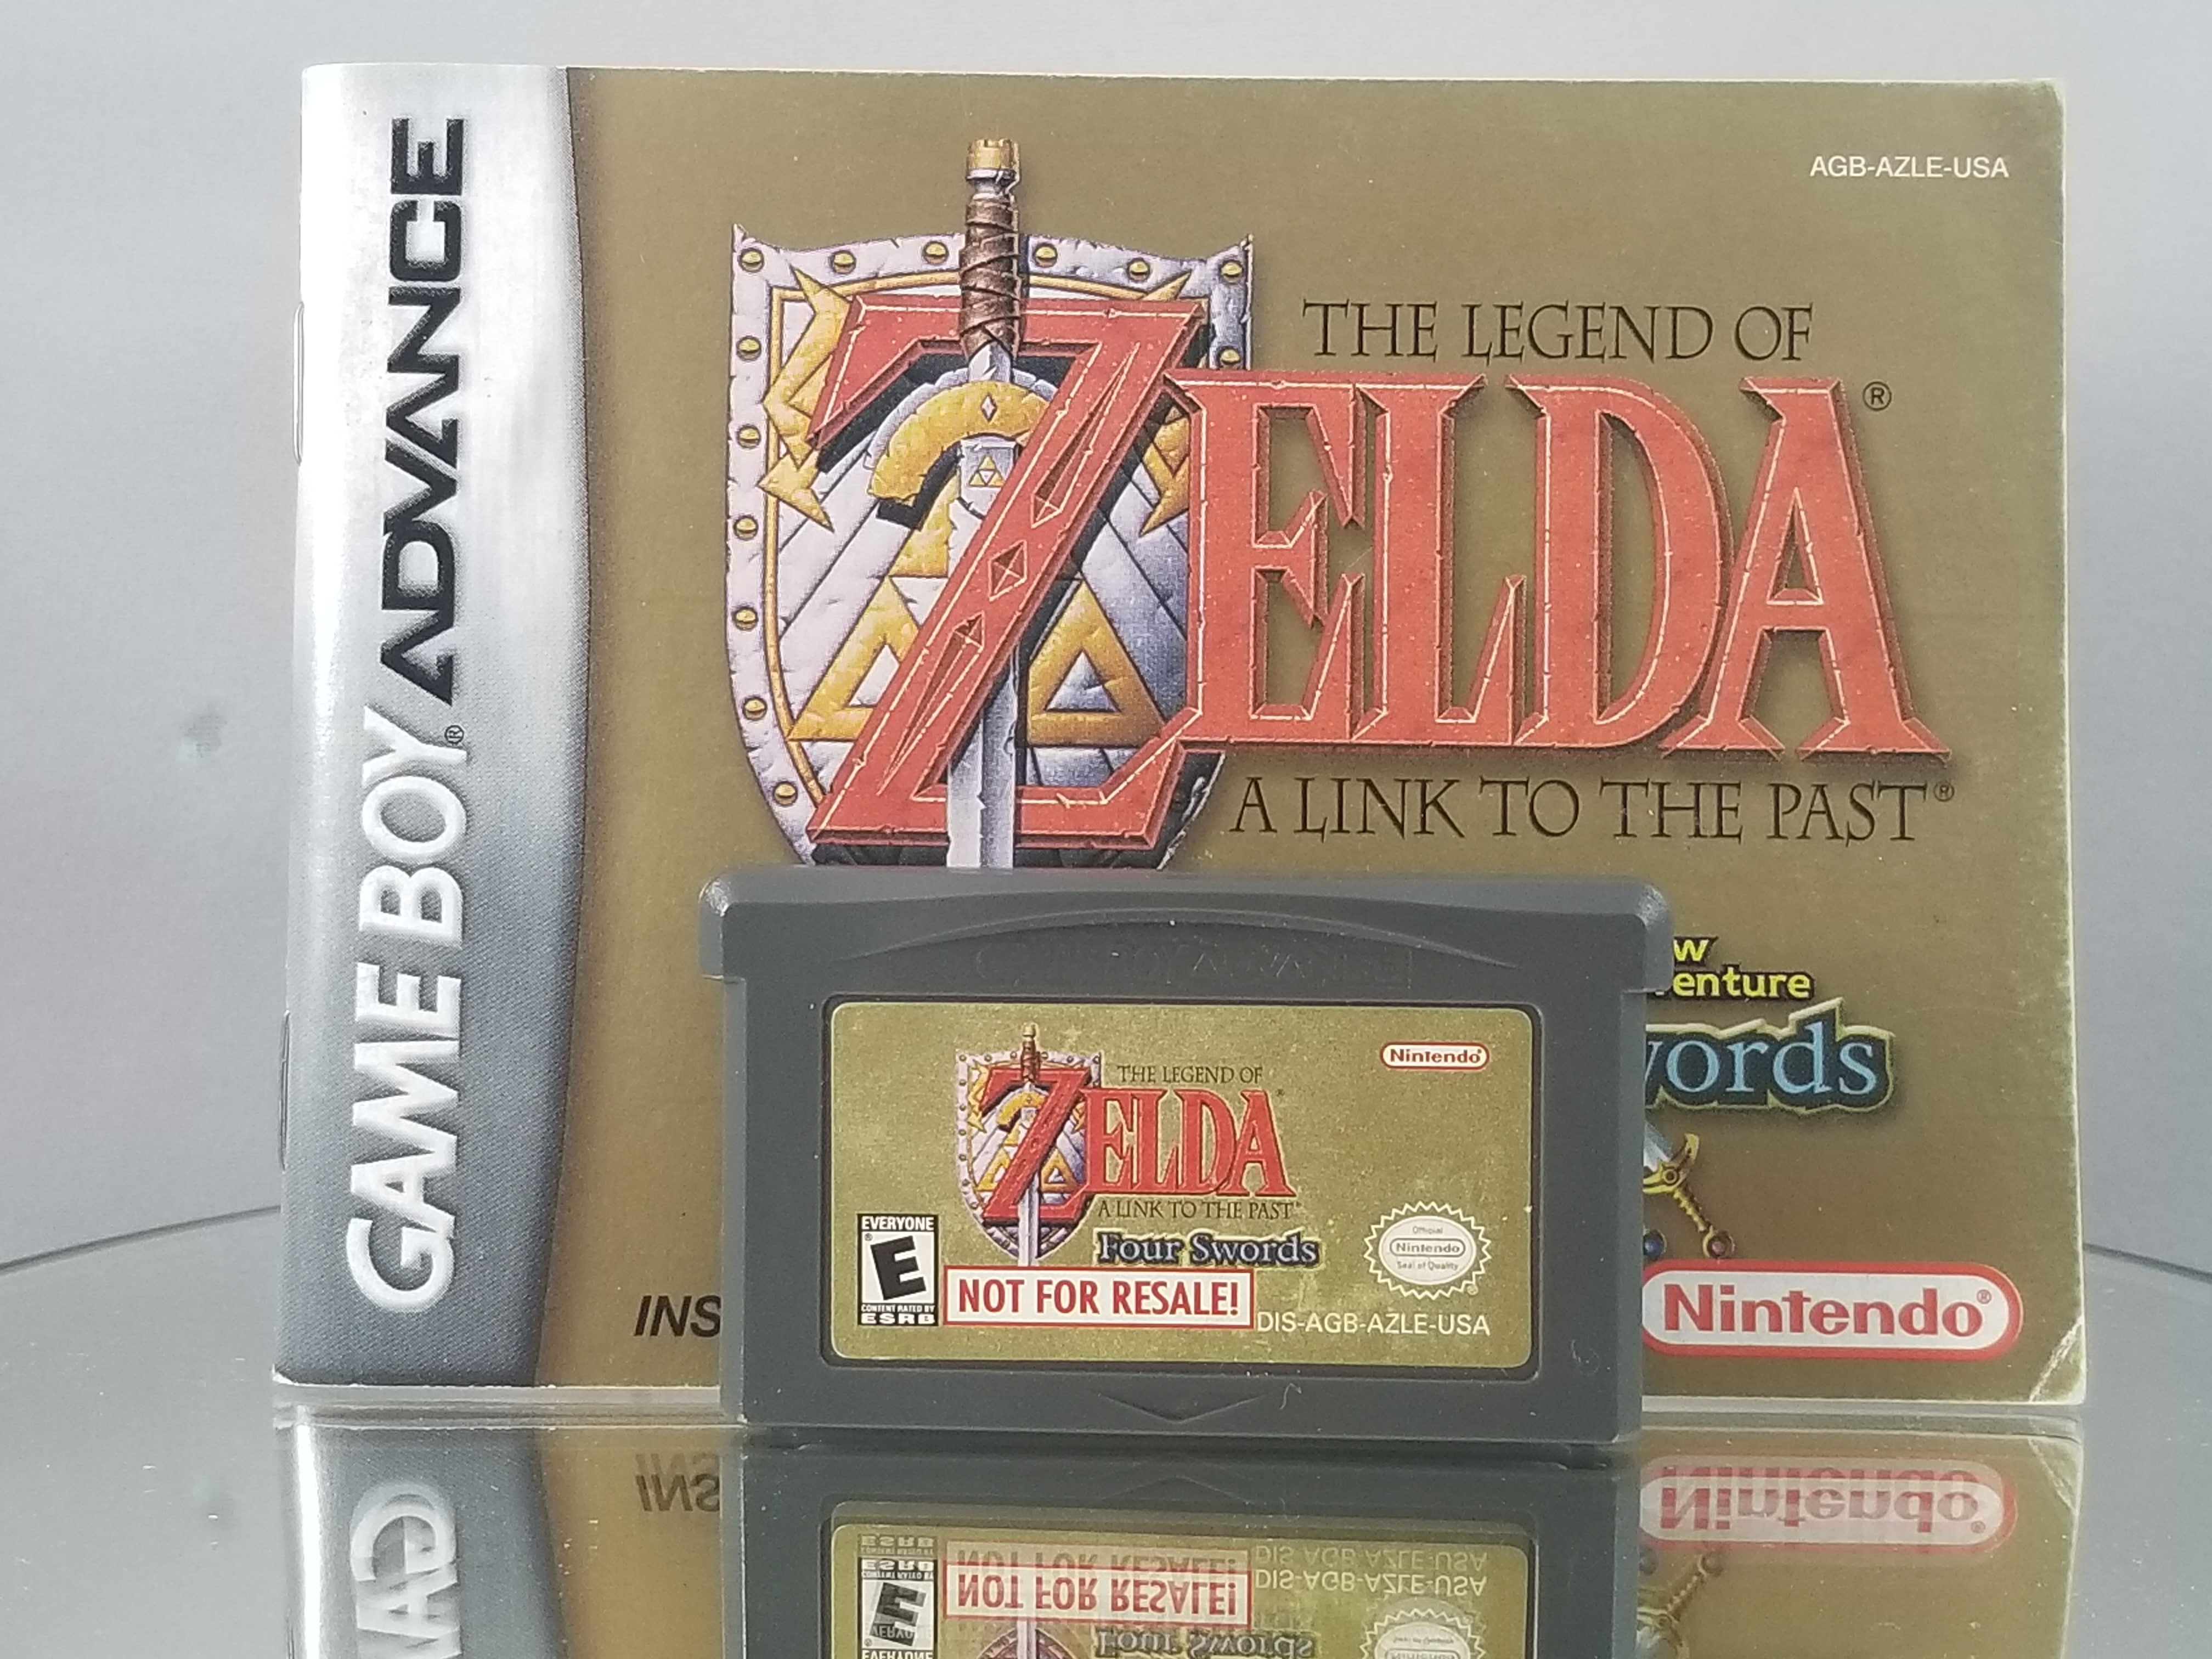 GBA the Legend of Zelda a Link to the Past Four Swords 